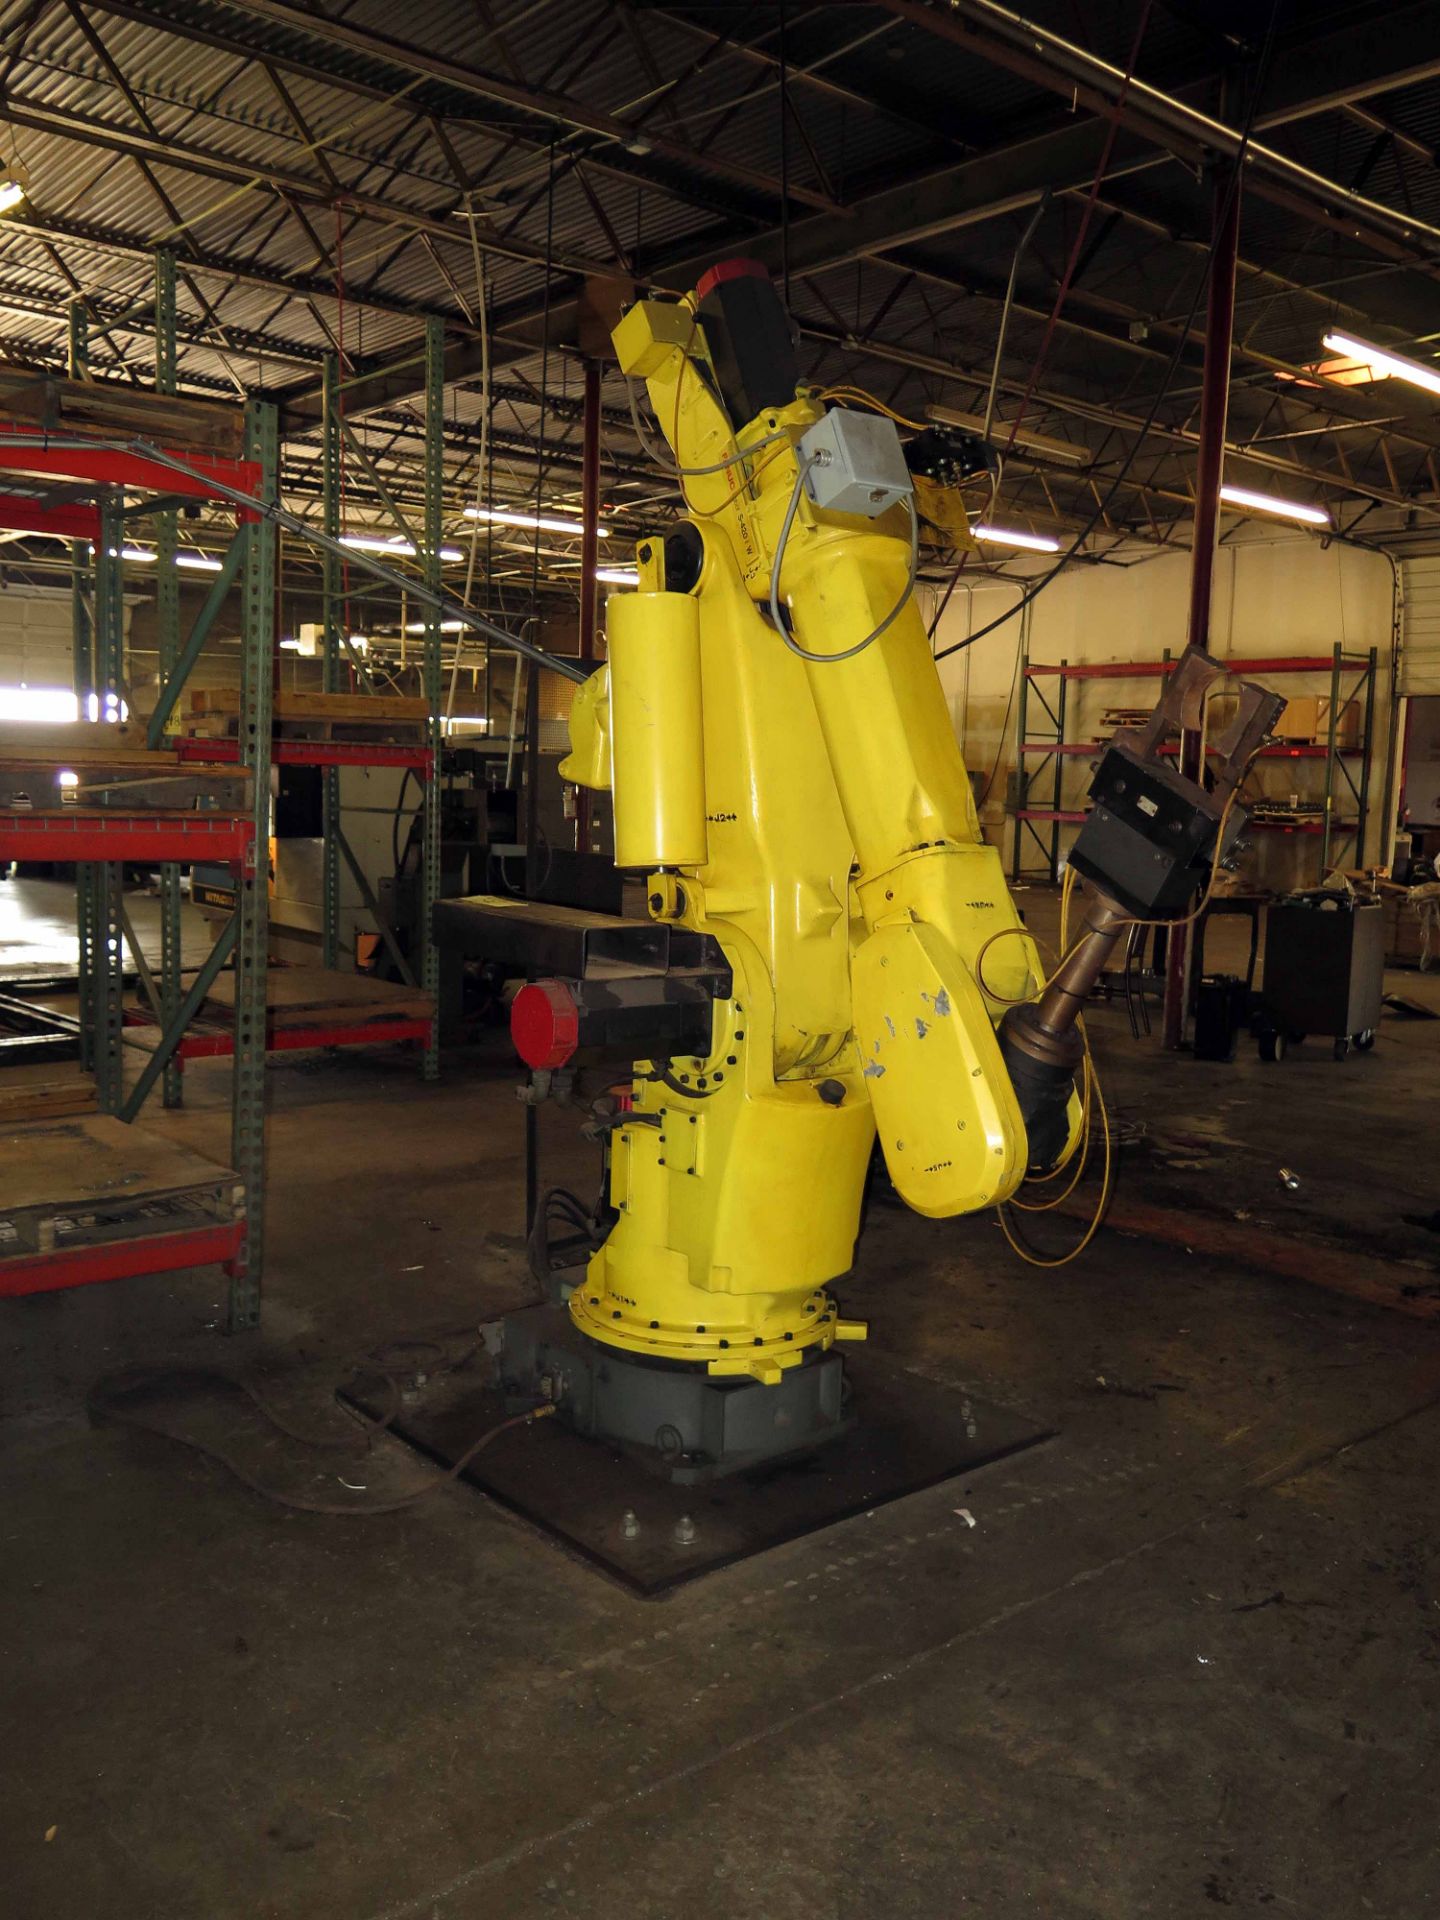 6-AXIS ROBOT, FANUC S-420iW, 341 lb. payload, 112.2" high reach, end effector, S/N E99903369